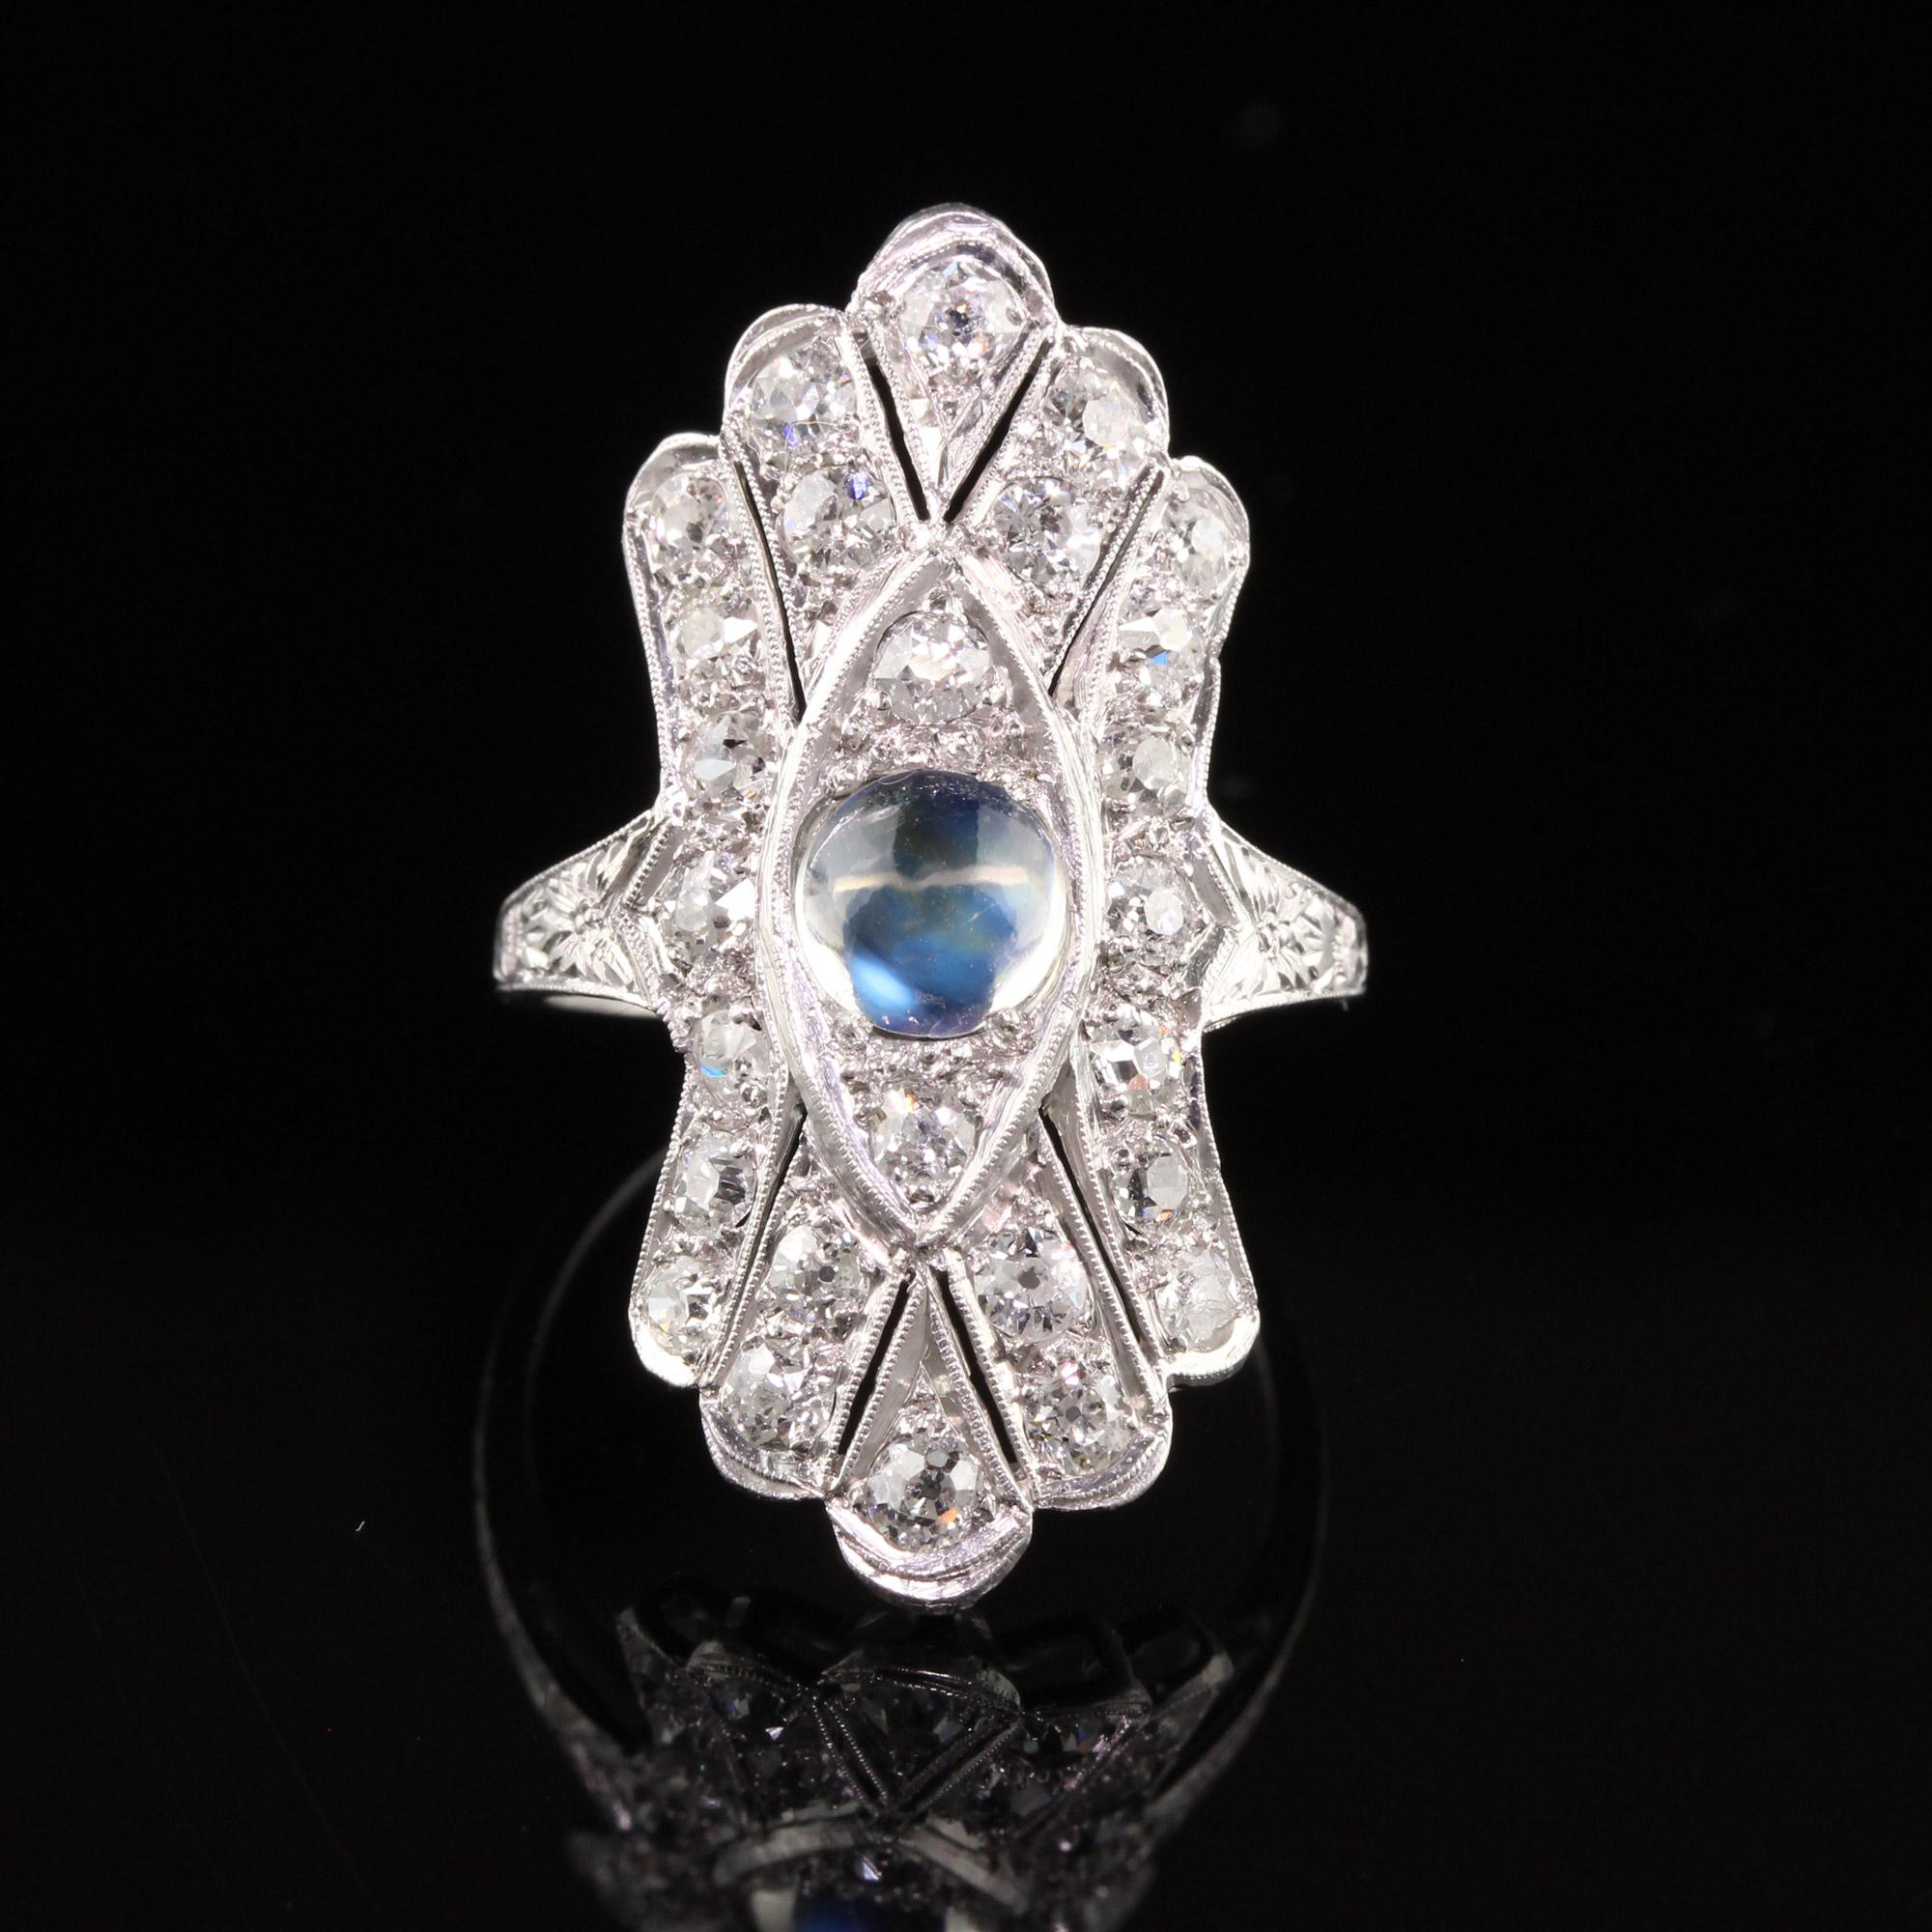 Antique Art Deco Platinum Old European Diamond and Moonstone Shield Ring In Good Condition For Sale In Great Neck, NY